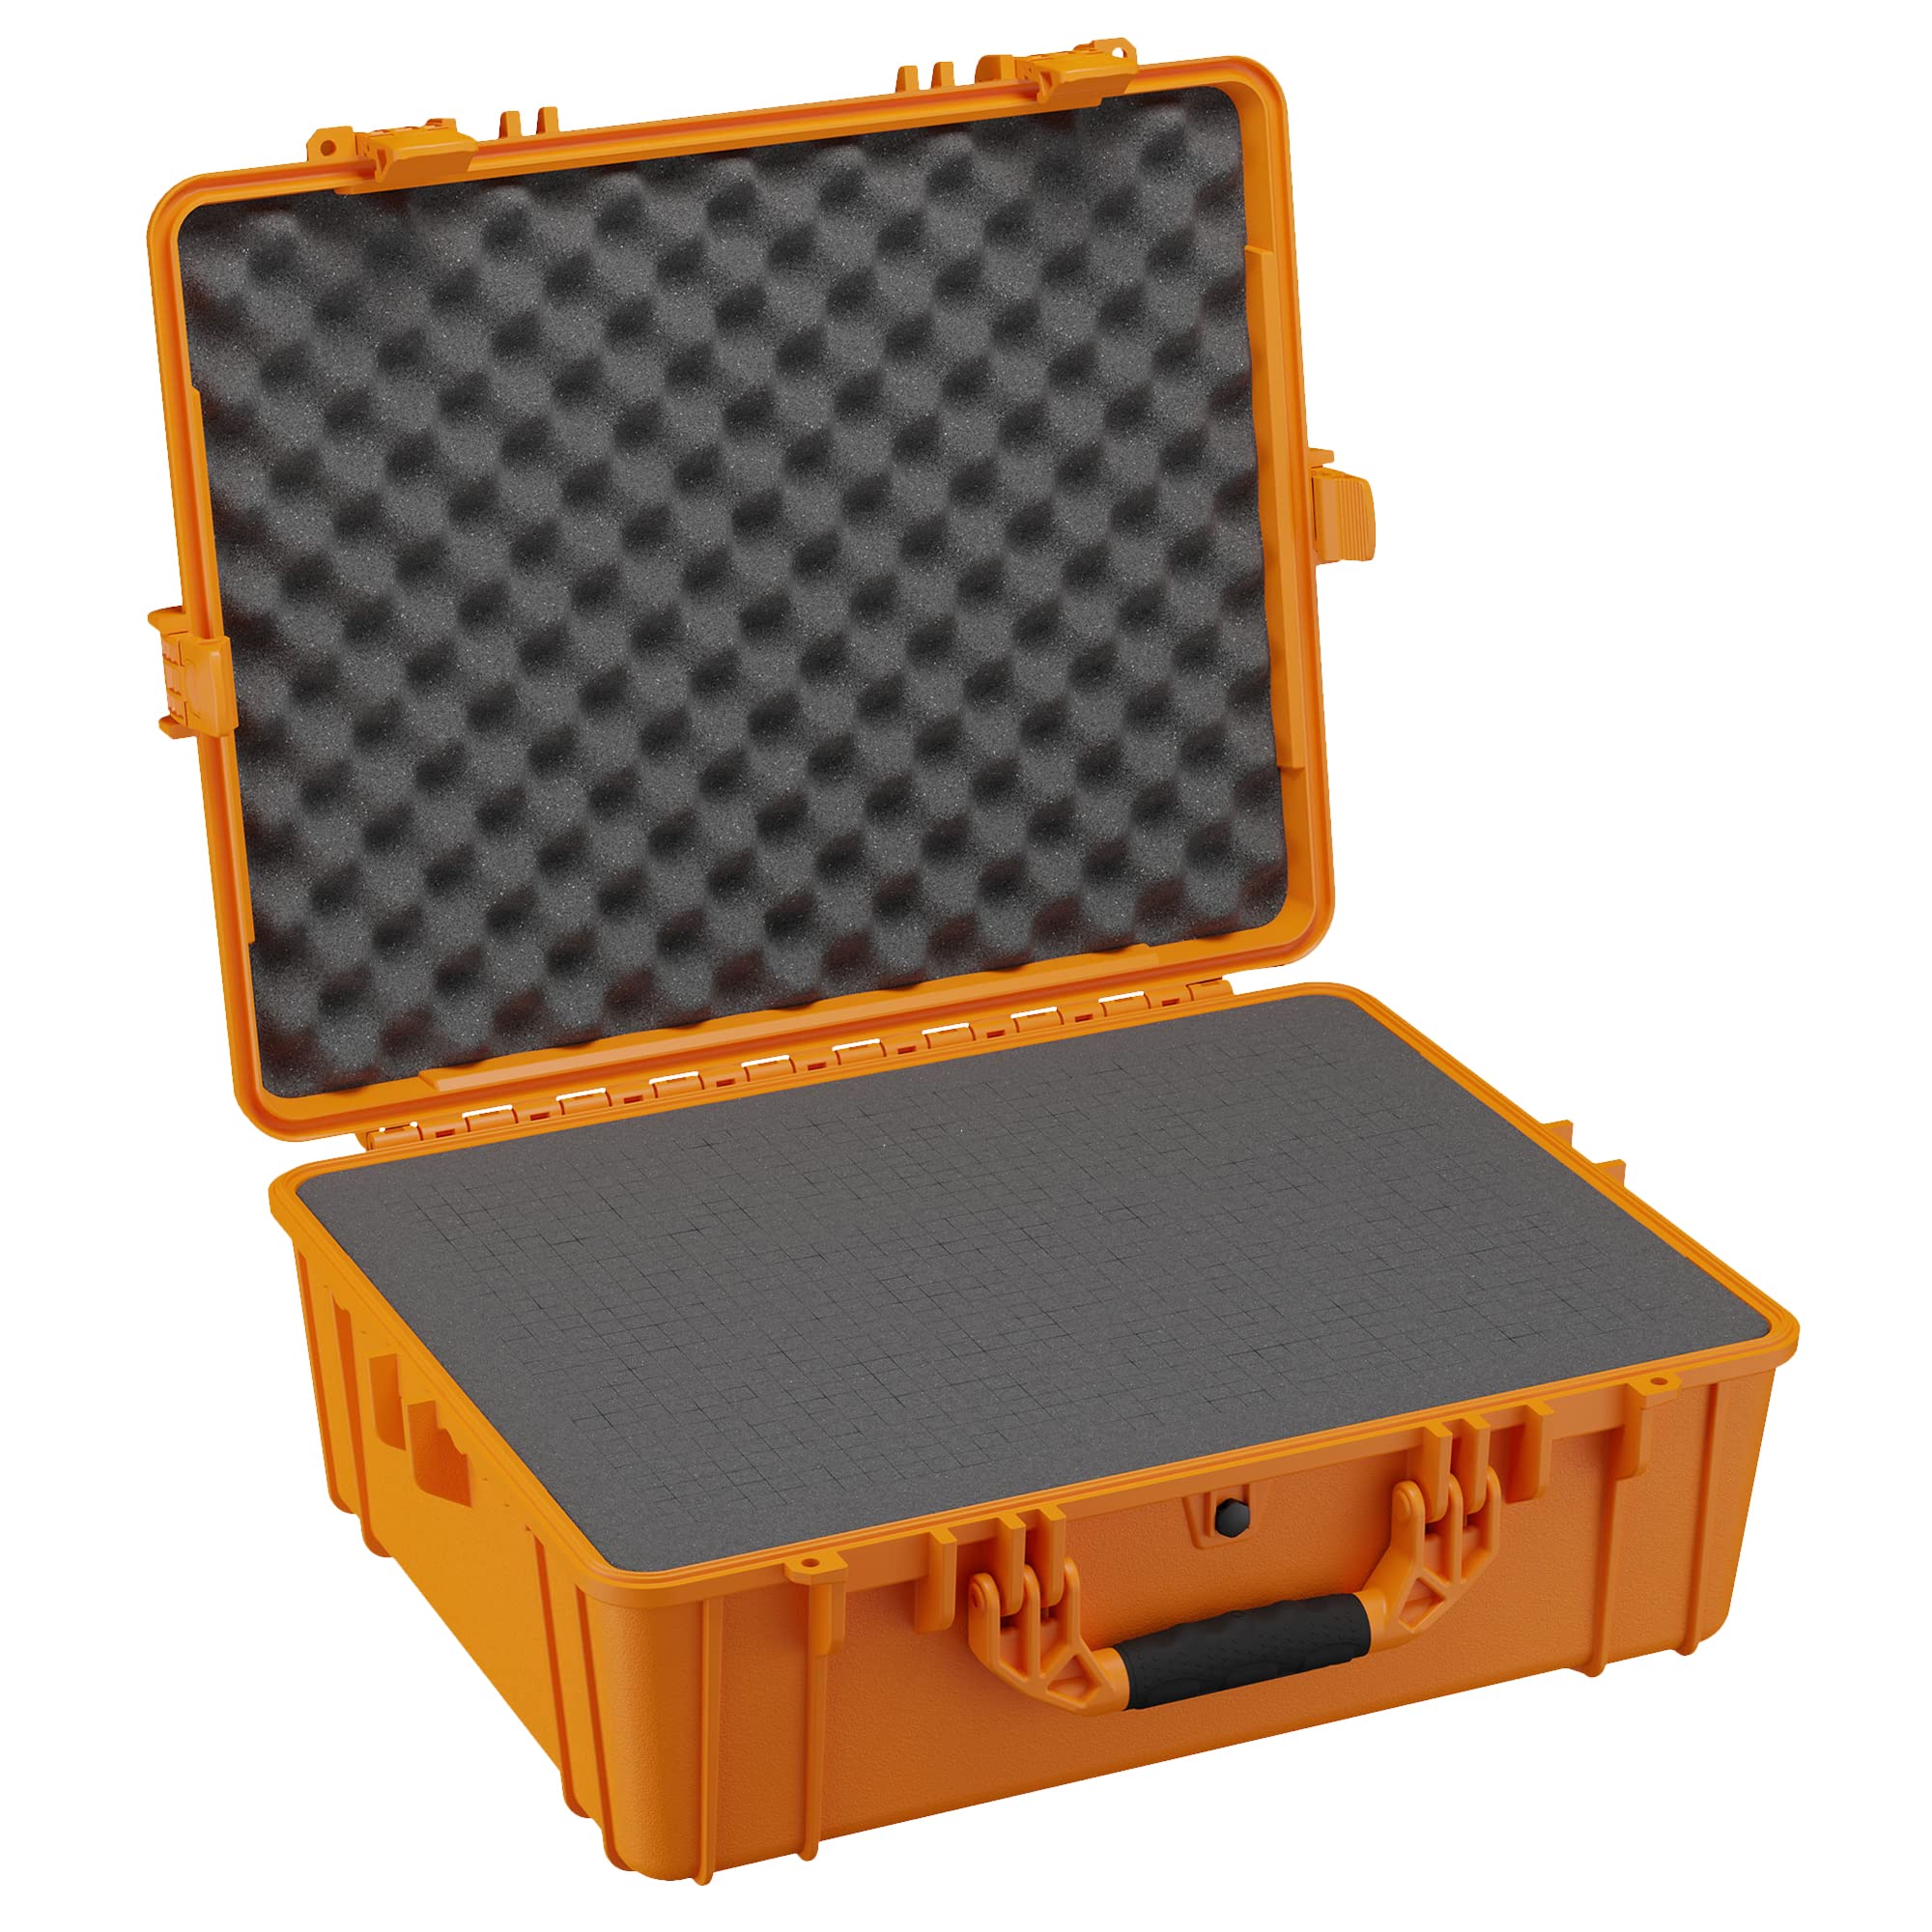 Condition 1 Medium Waterproof Hard Travel Case with Foam Heavy-Duty Protective Portable Storage Box, Camera, Tool, Handgun, Drone Carrying Cases, 13.5